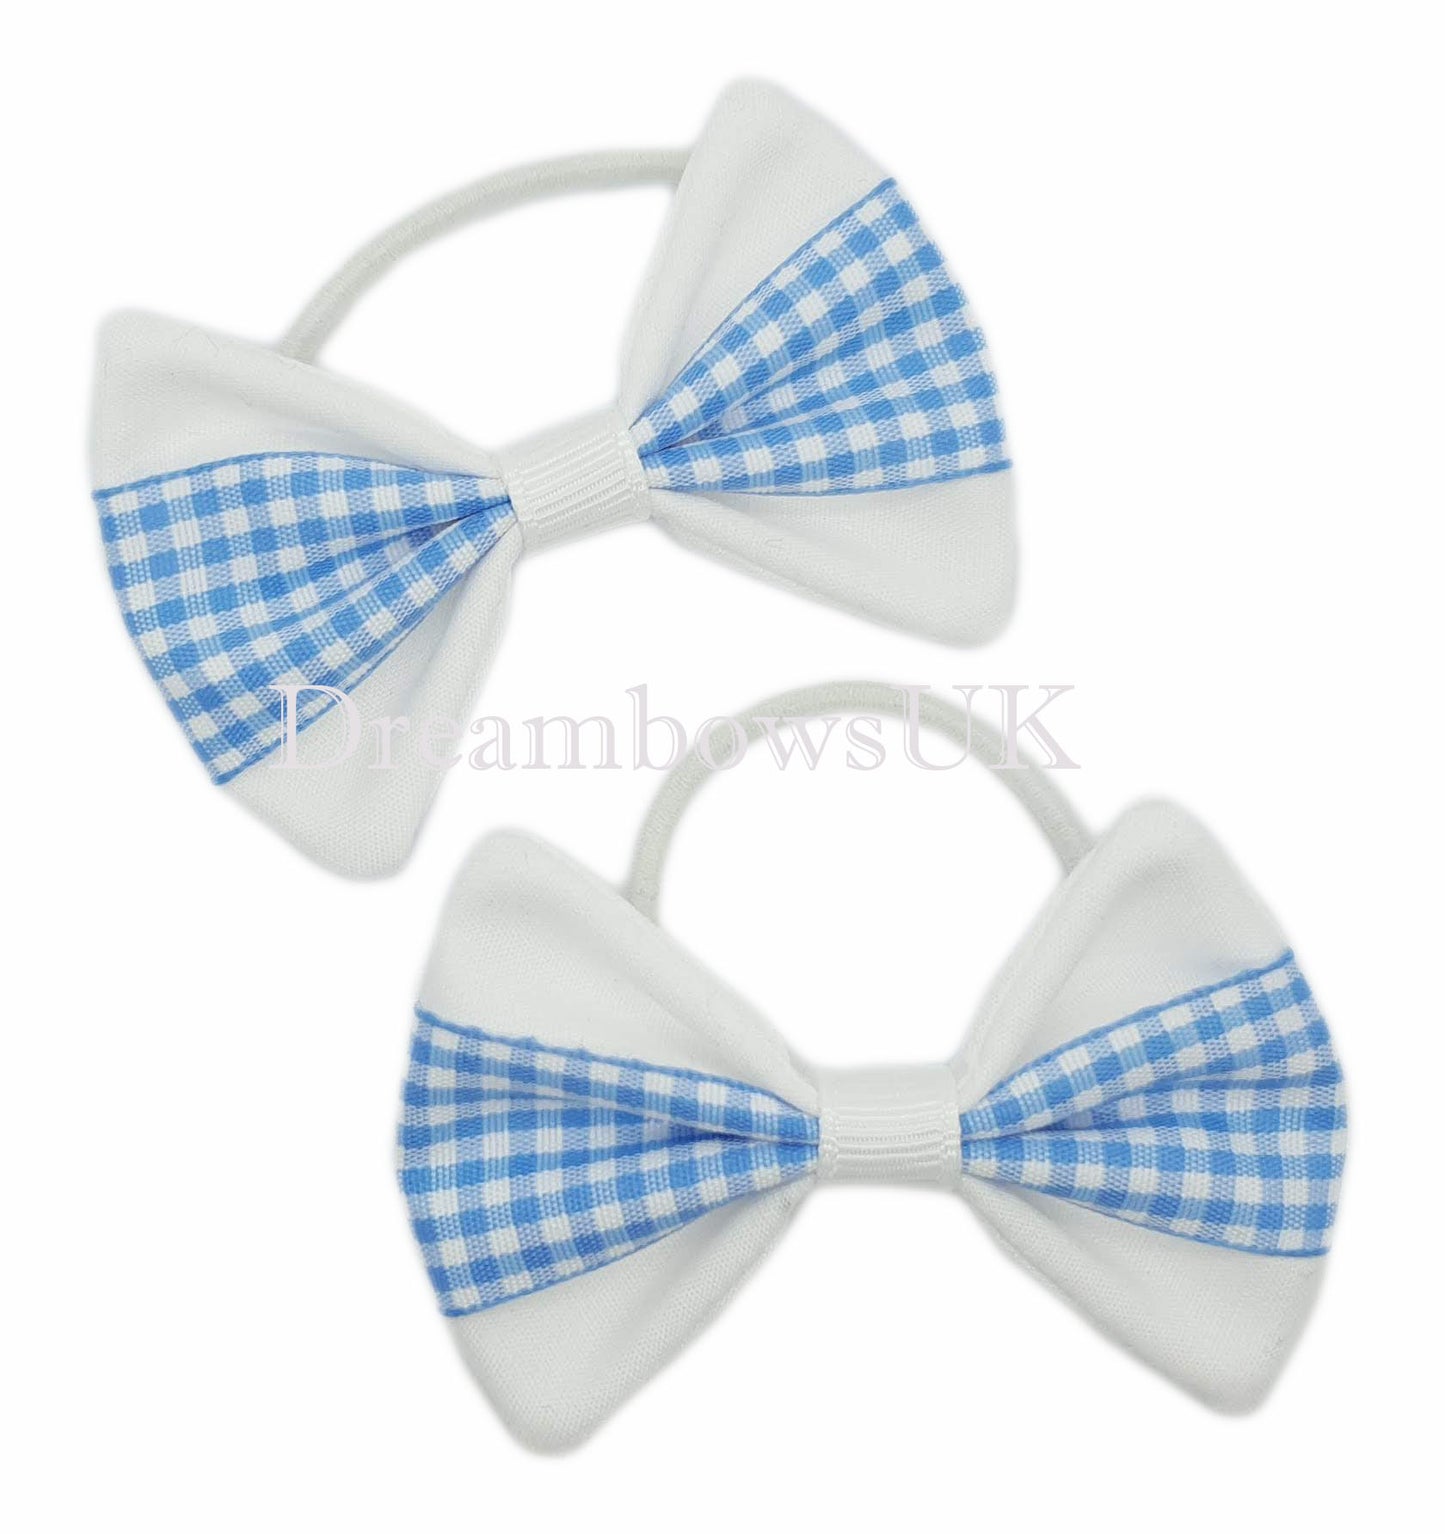 baby blue and white gingham hair bows on thin hair ties